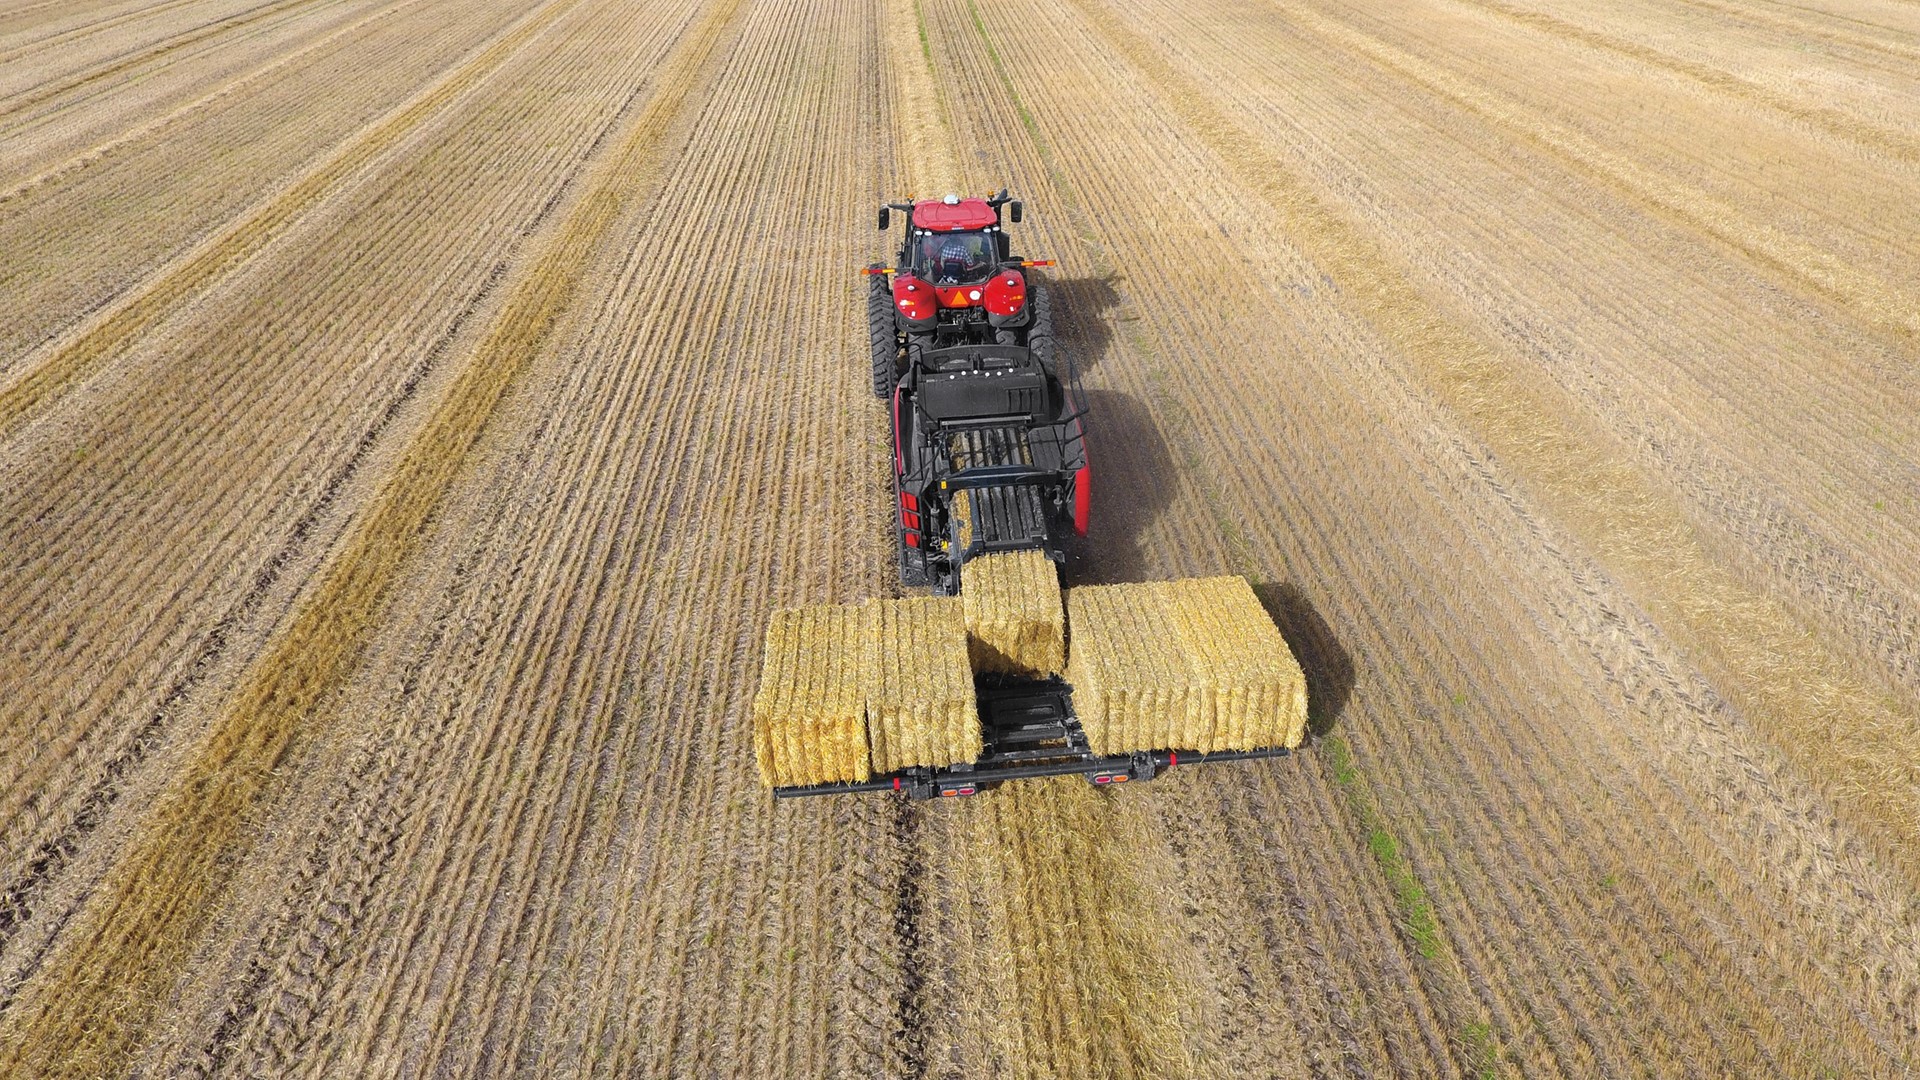 Case IH introduces the AC5150 large square baler accumulator, designed to carry five uniformly packaged bales